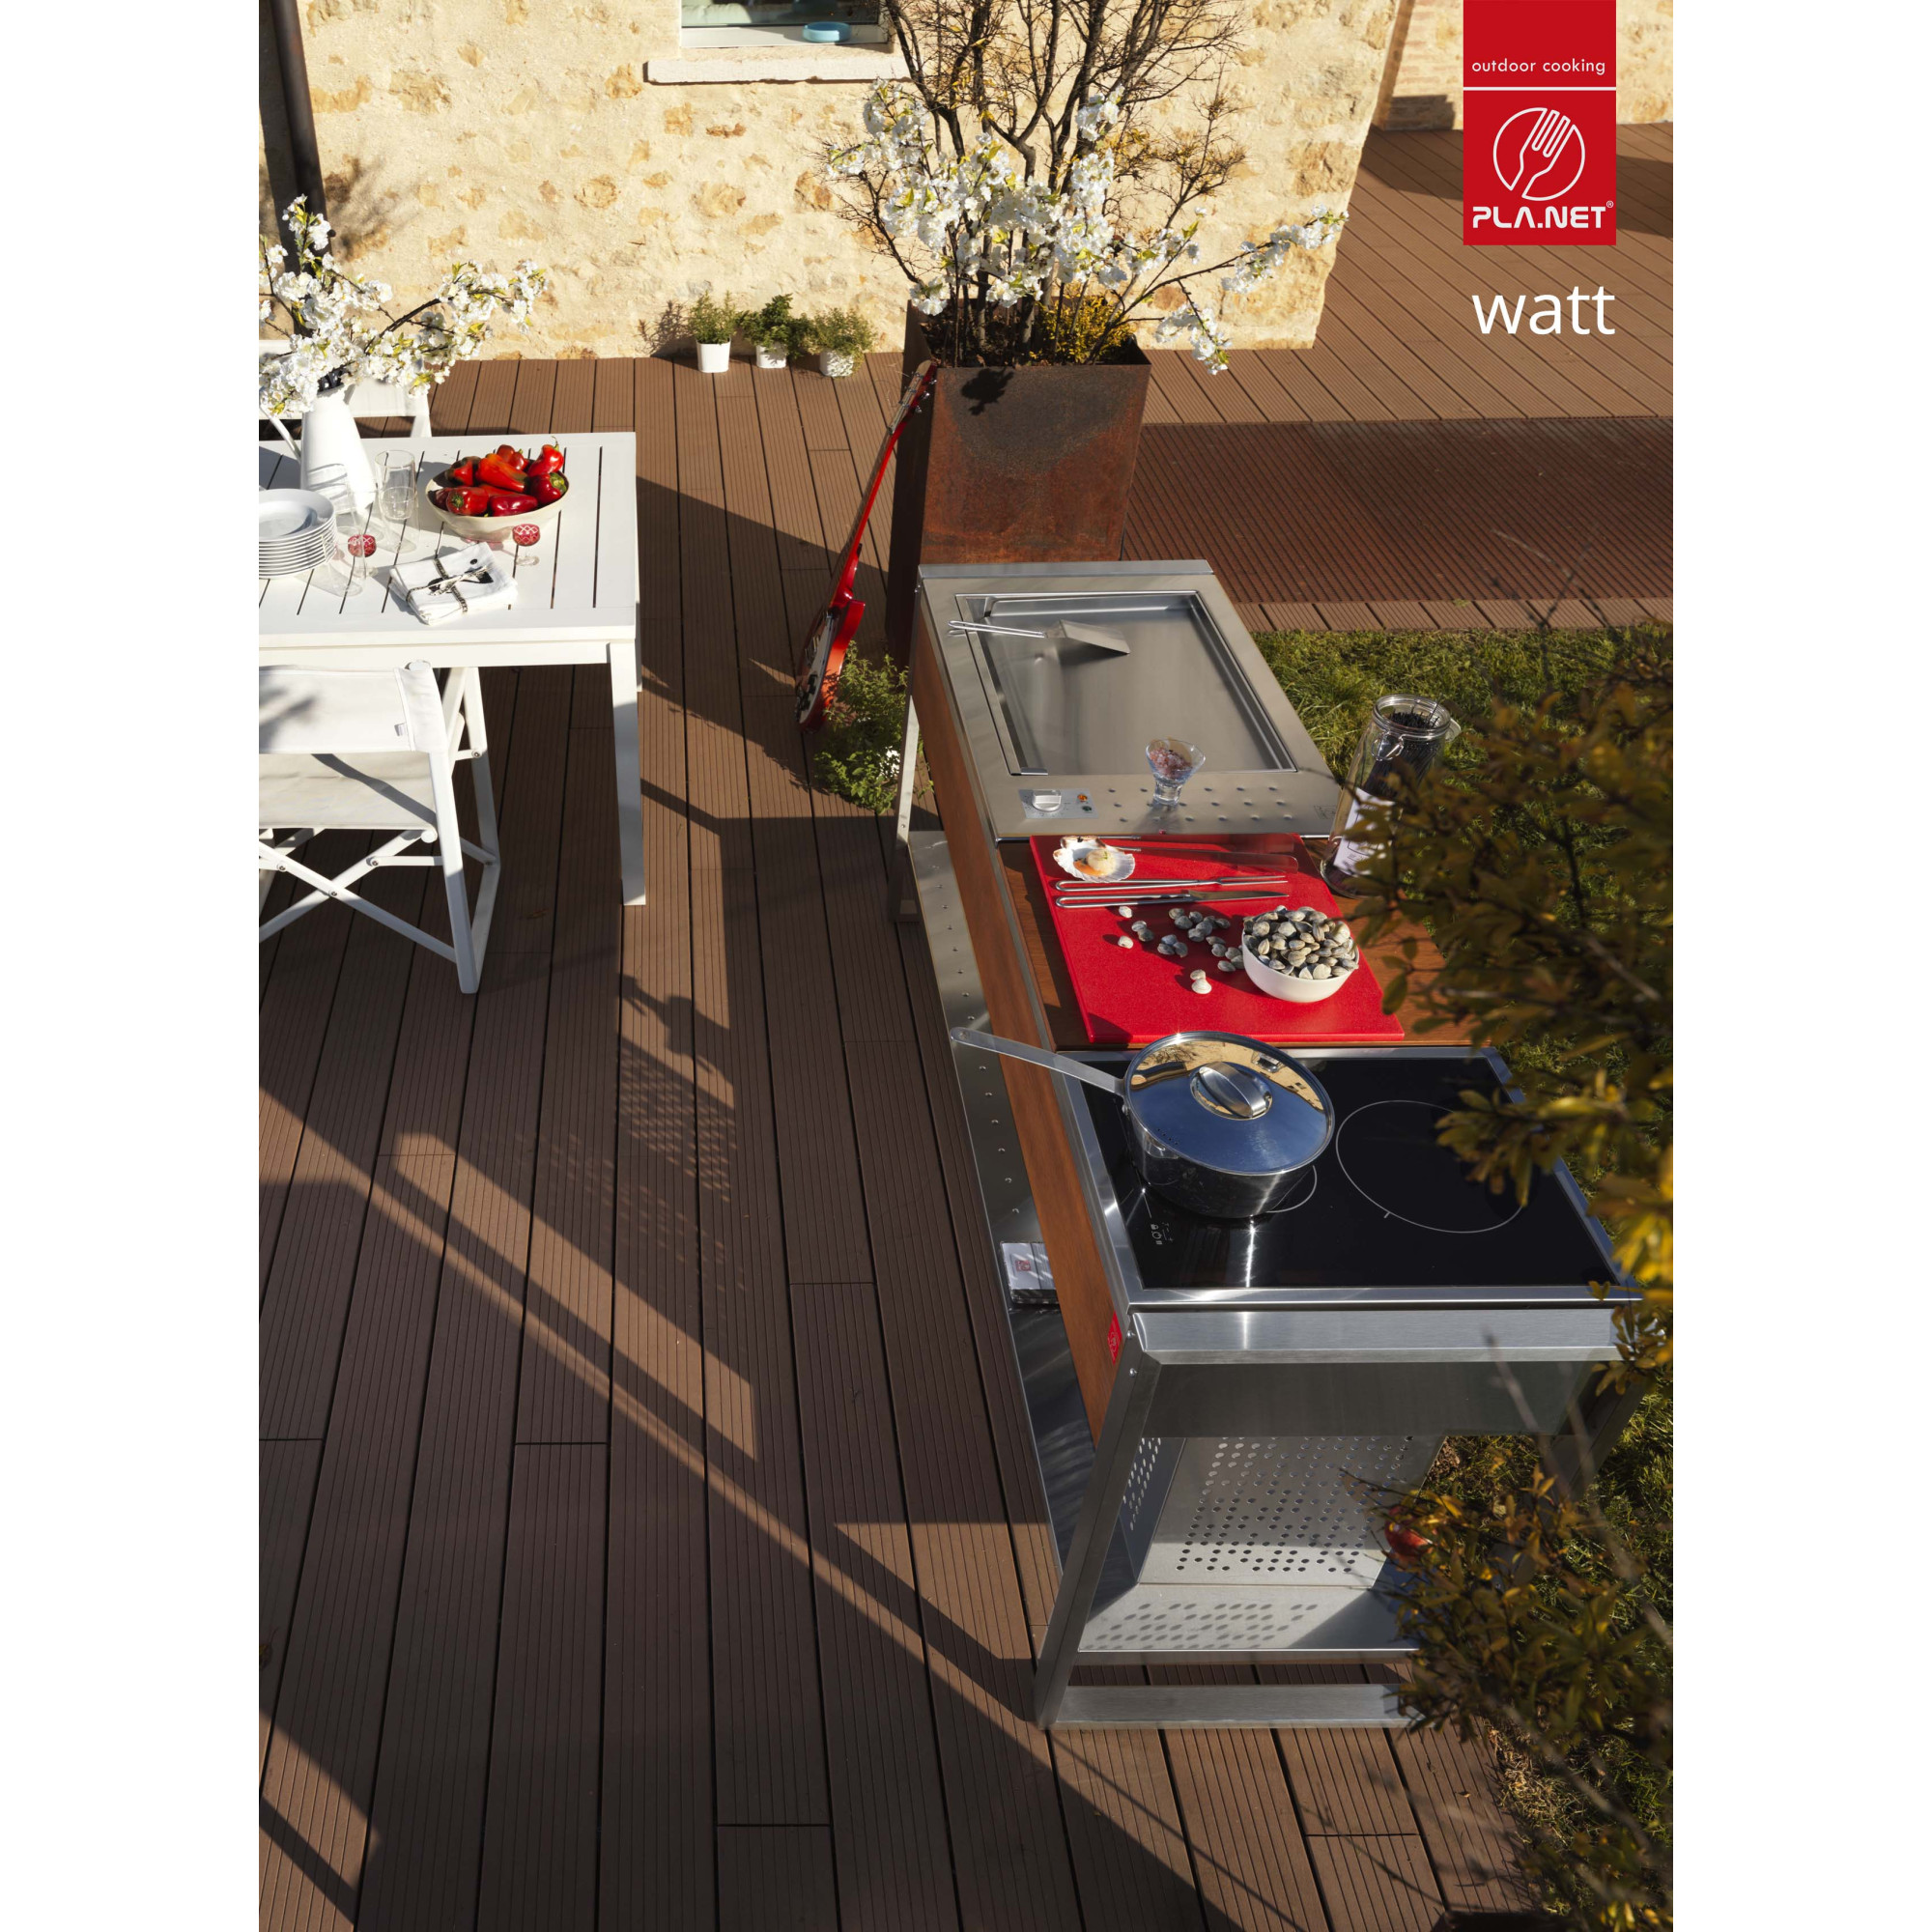 OASI 183, Outdoor Kitchens, Cooking system